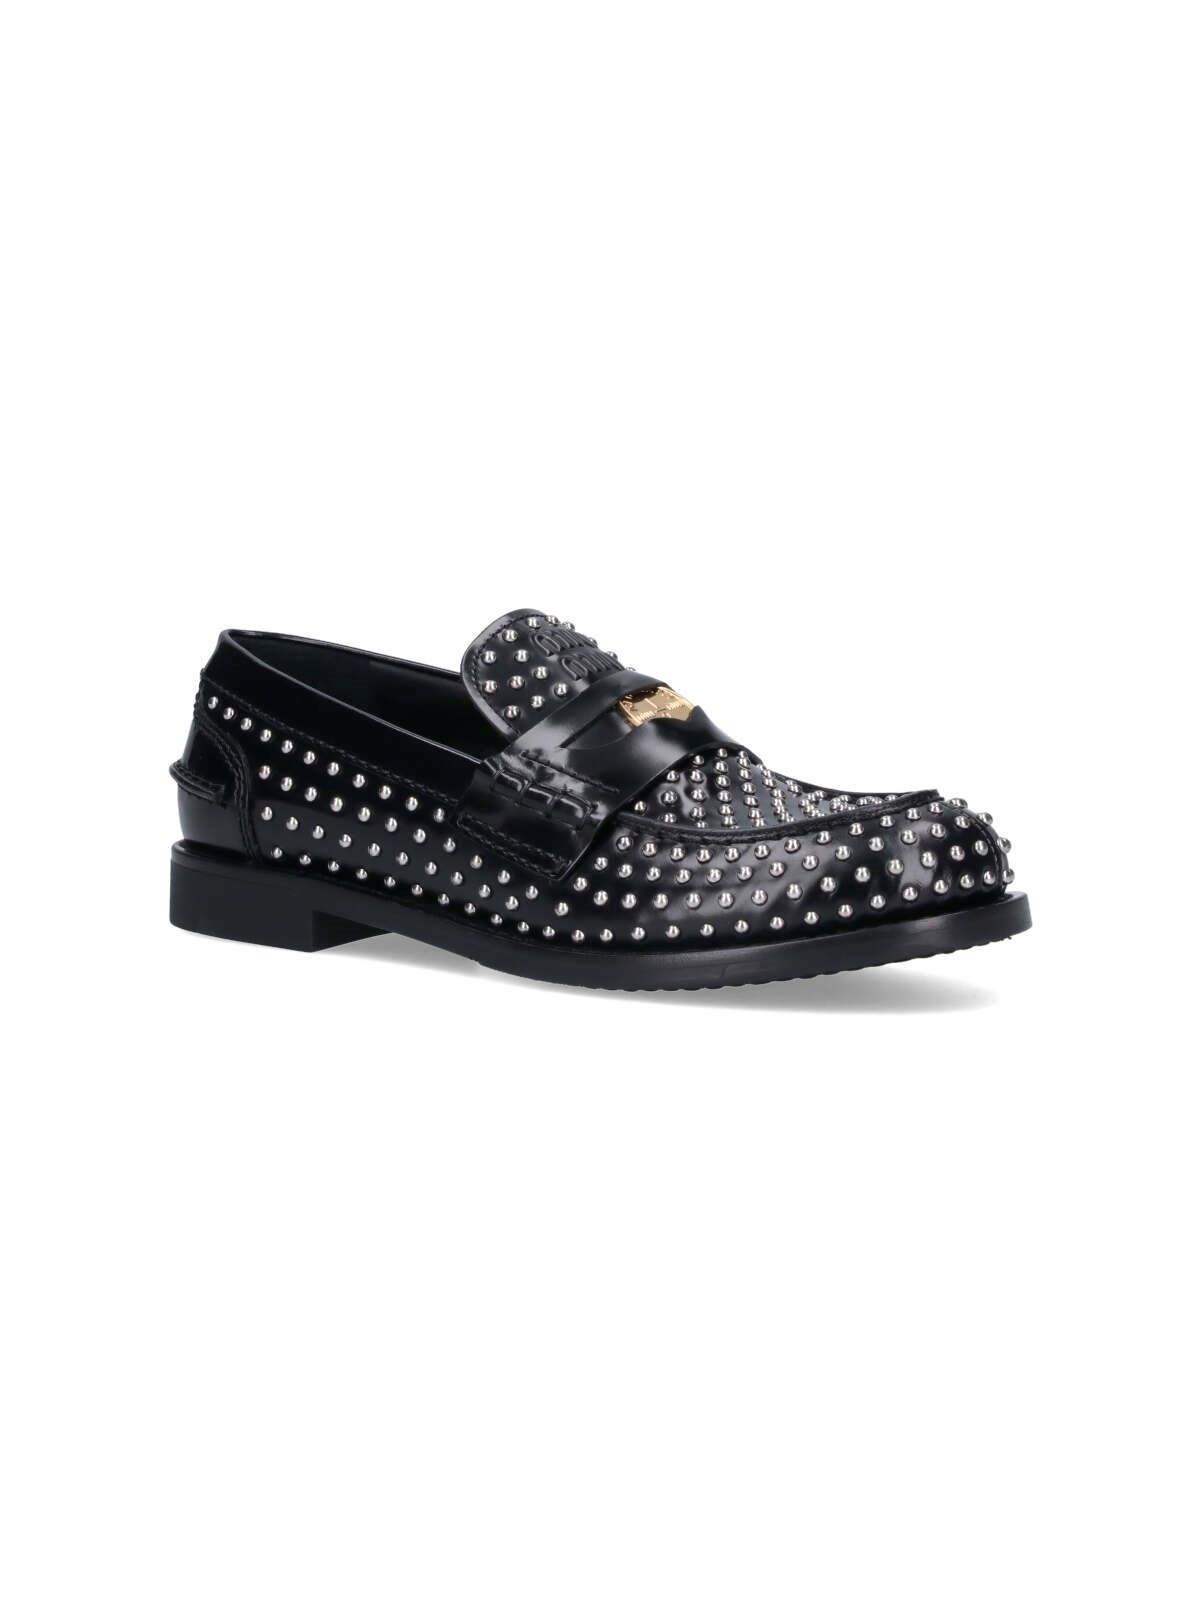 "PENNY LOAFERS" STUDDED LOAFERS - 2